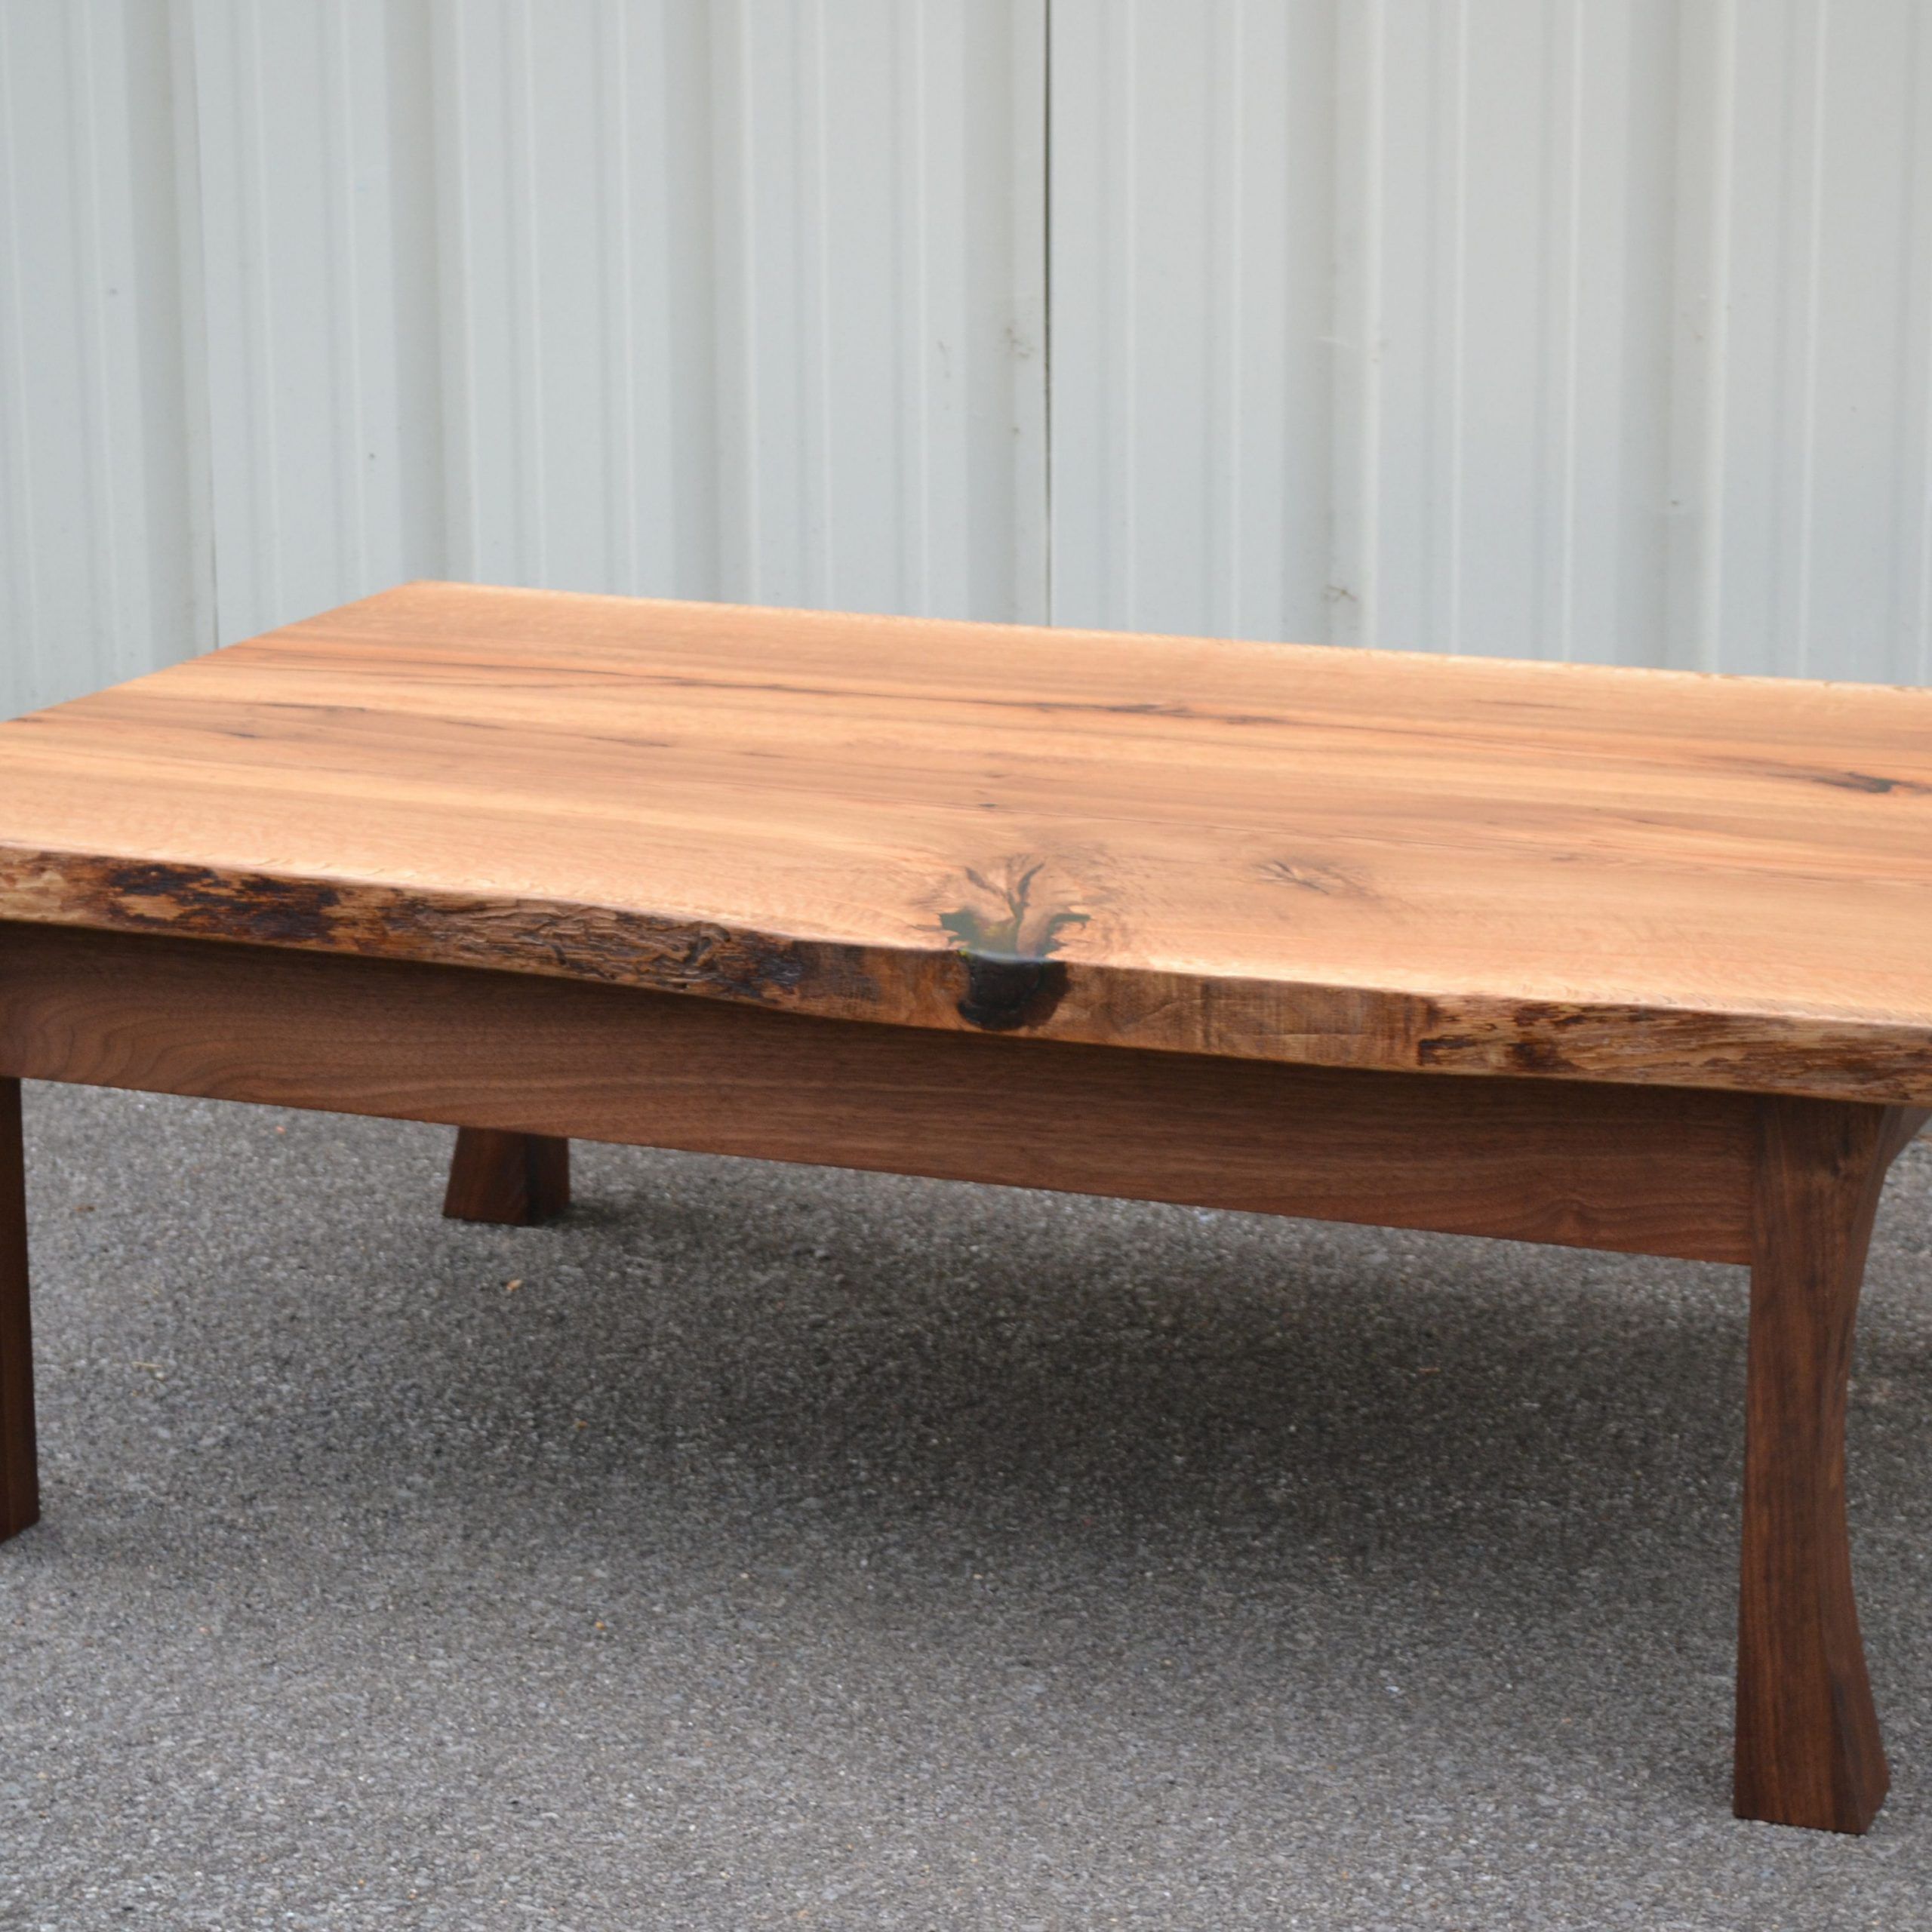 The Unique Rustic Coffee Tables For Sale | Coffee Table Within Rustic Oak And Black Coffee Tables (View 2 of 15)